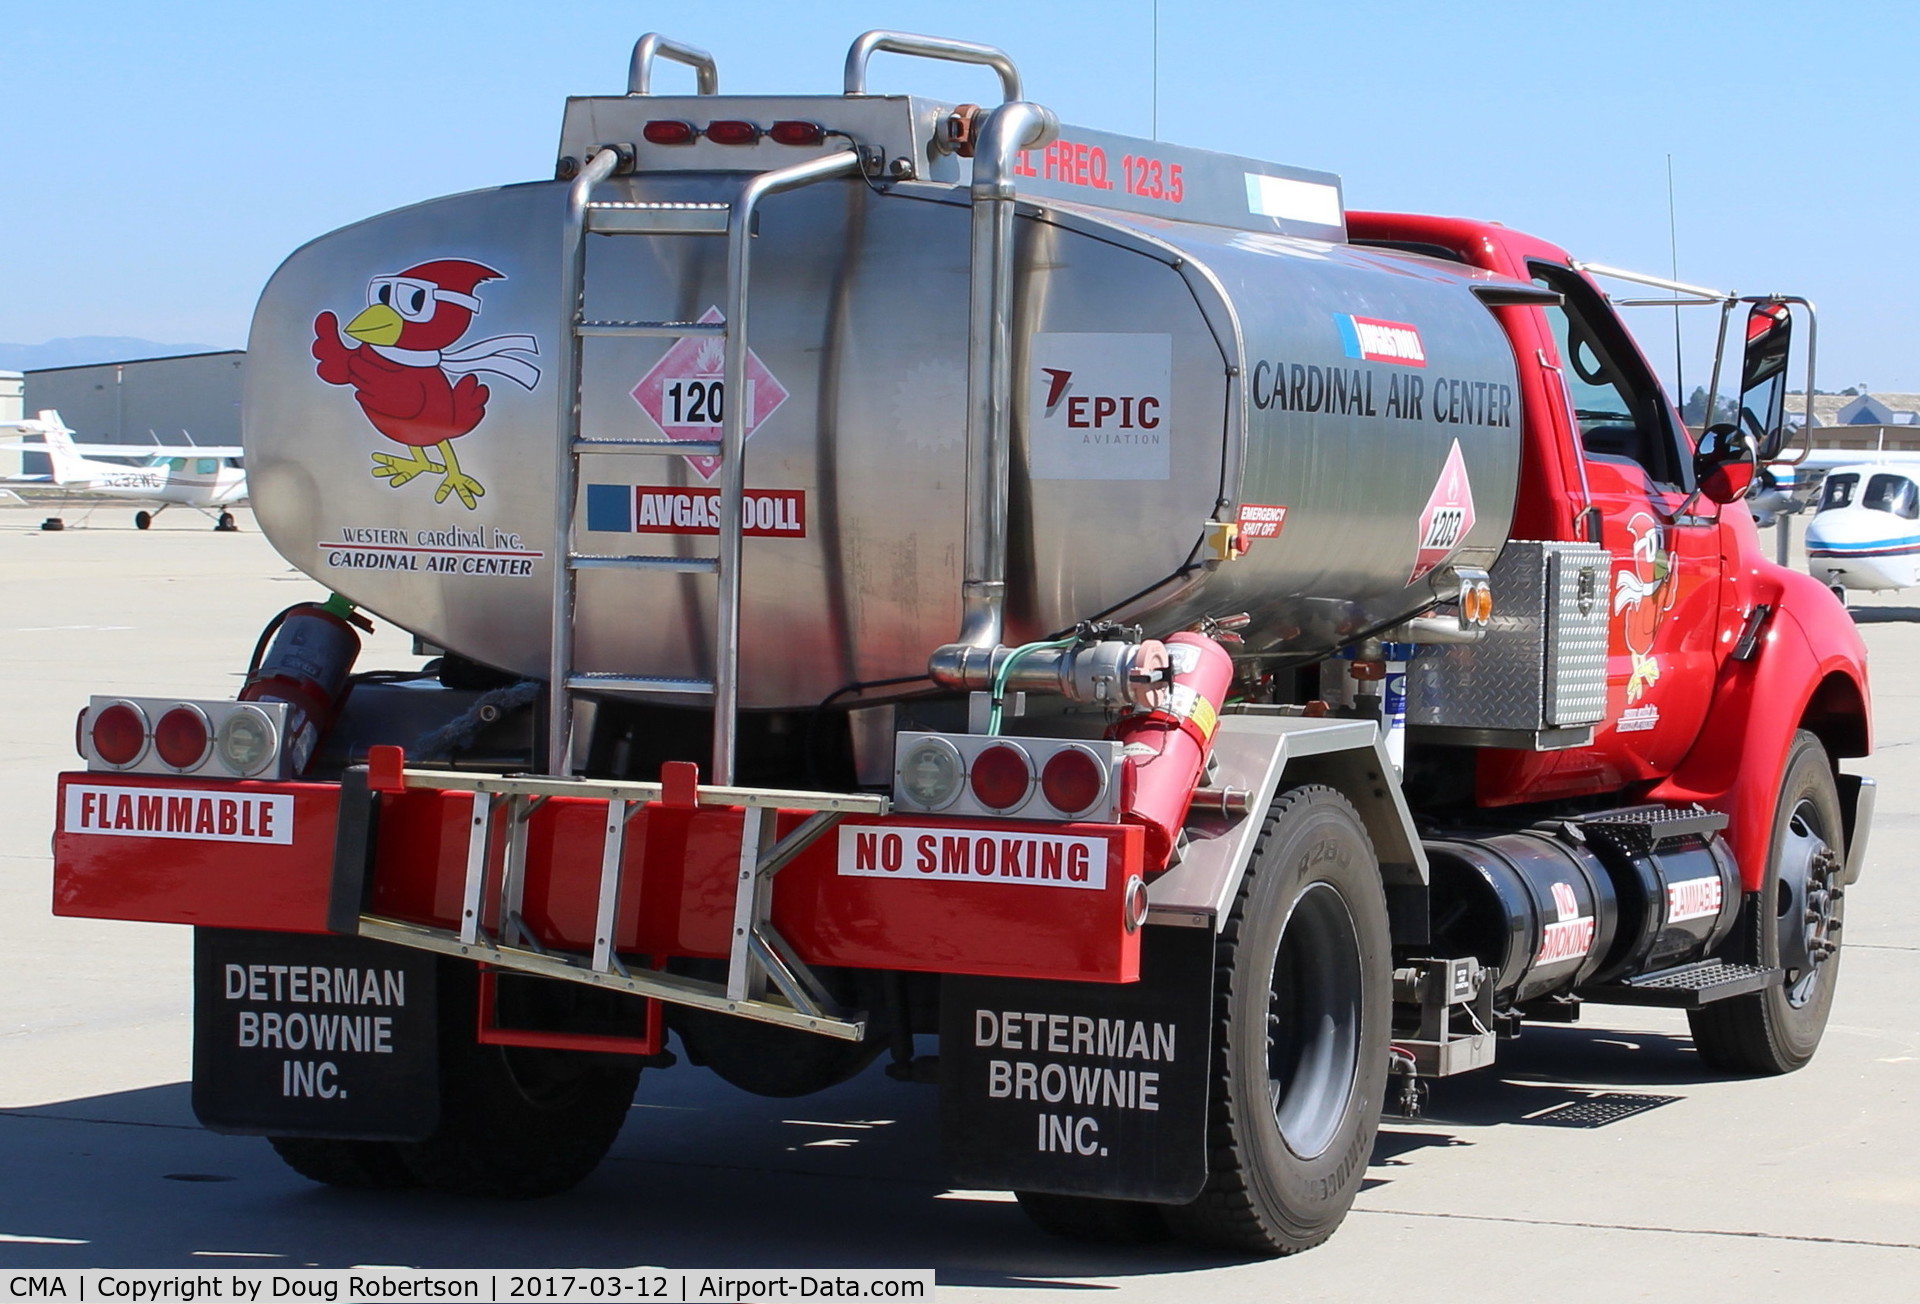 Camarillo Airport (CMA) - Cardinal Air Center Refueler-100LL. One of several fueling options at CMA, including Self-Serve near tower.